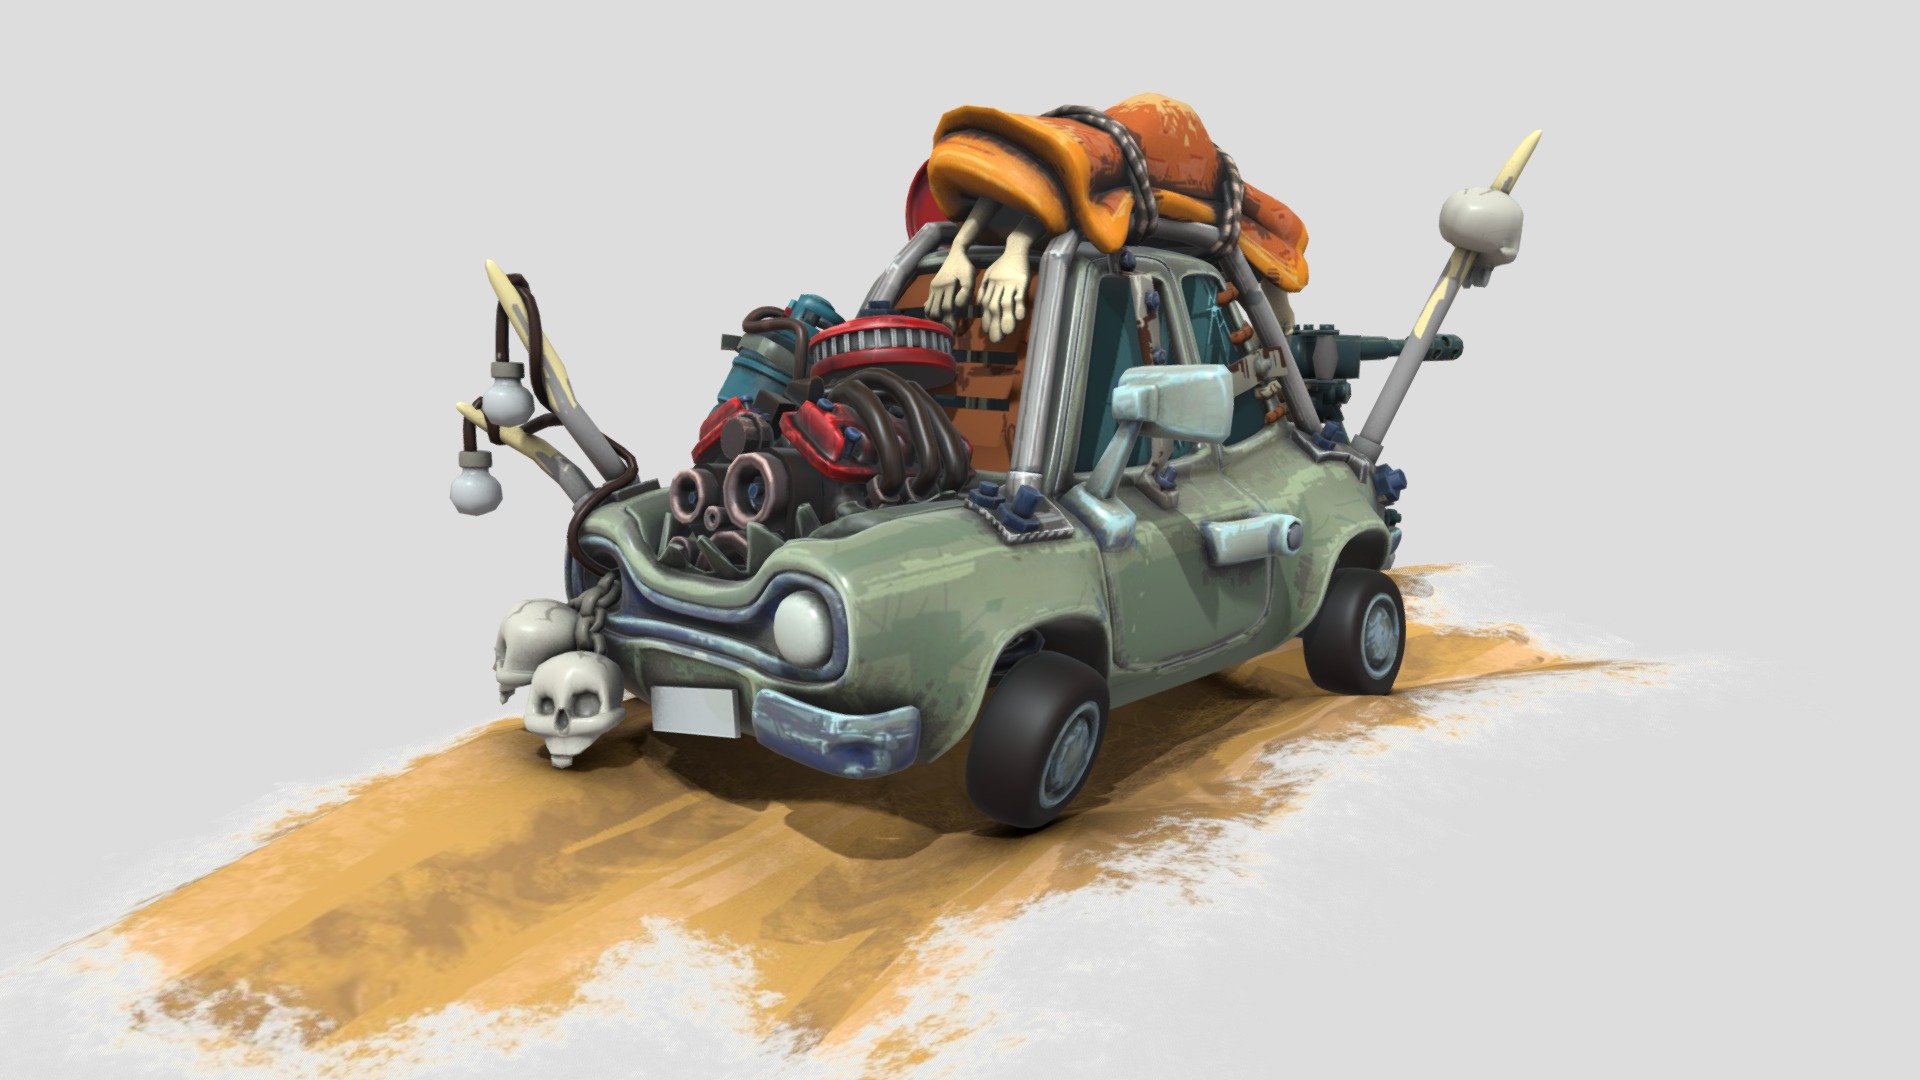 A Mad Max car for fun.
Maya for modeling
Painter for hand painted textures - MK1 apocalypse - 3D model by ArnaudSauzedde 3d model